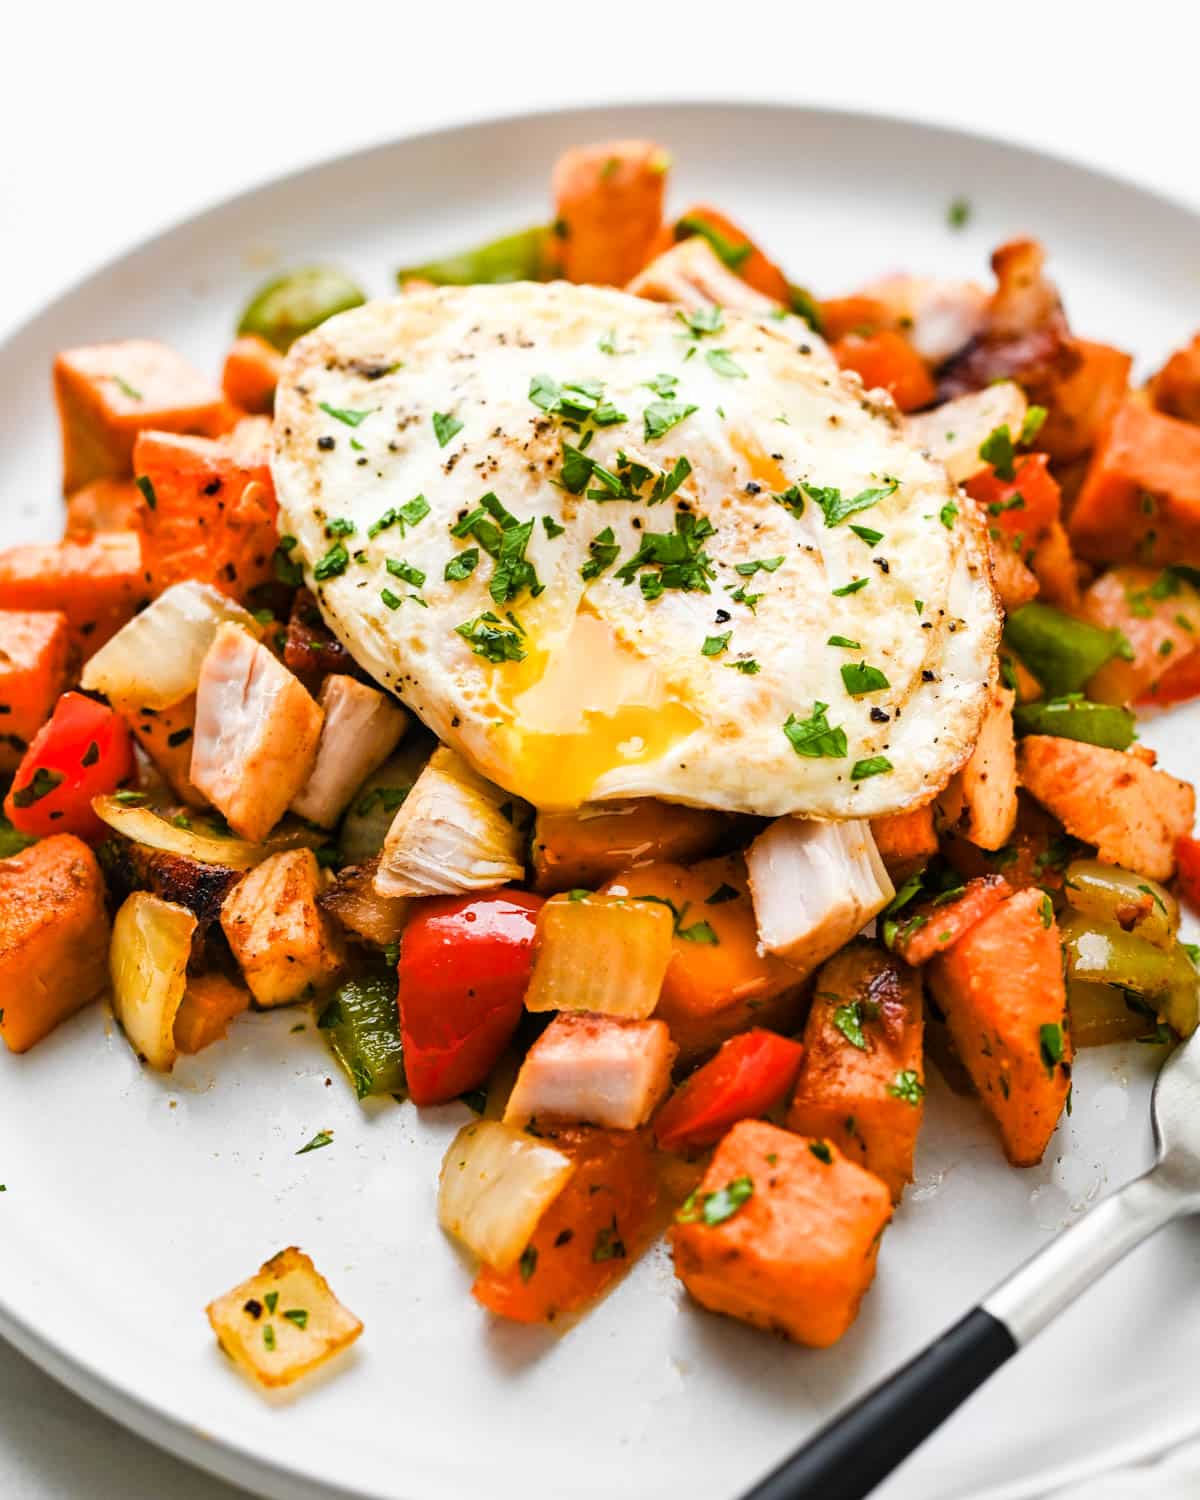 Turkey hash with a fried egg.